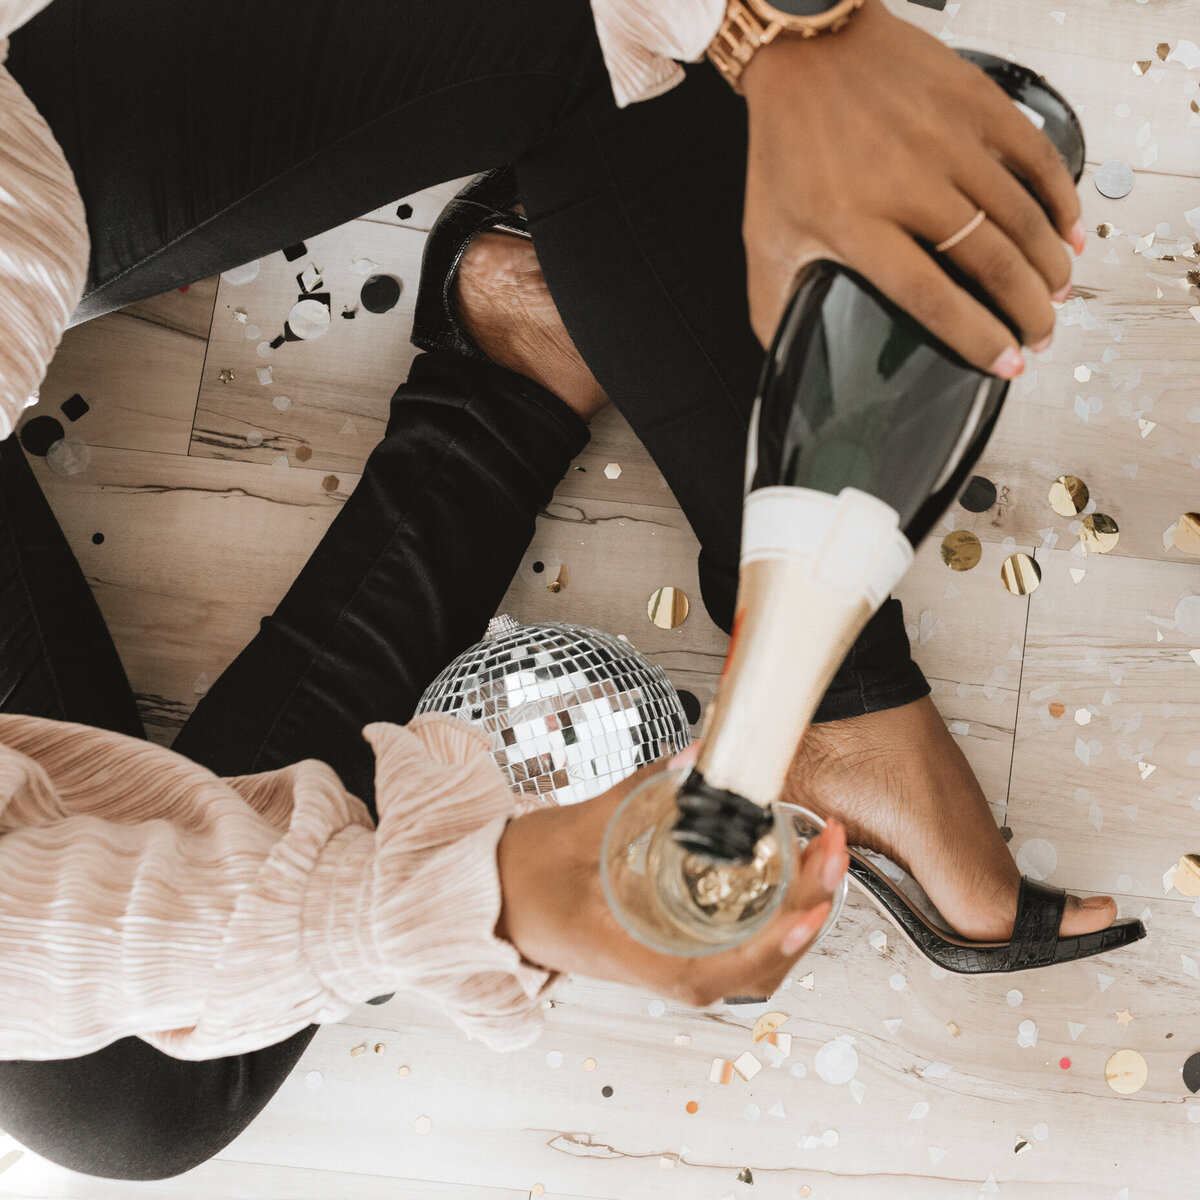 Closeup of a woman’s arm while sitting on the floor pouring a flute of champagne